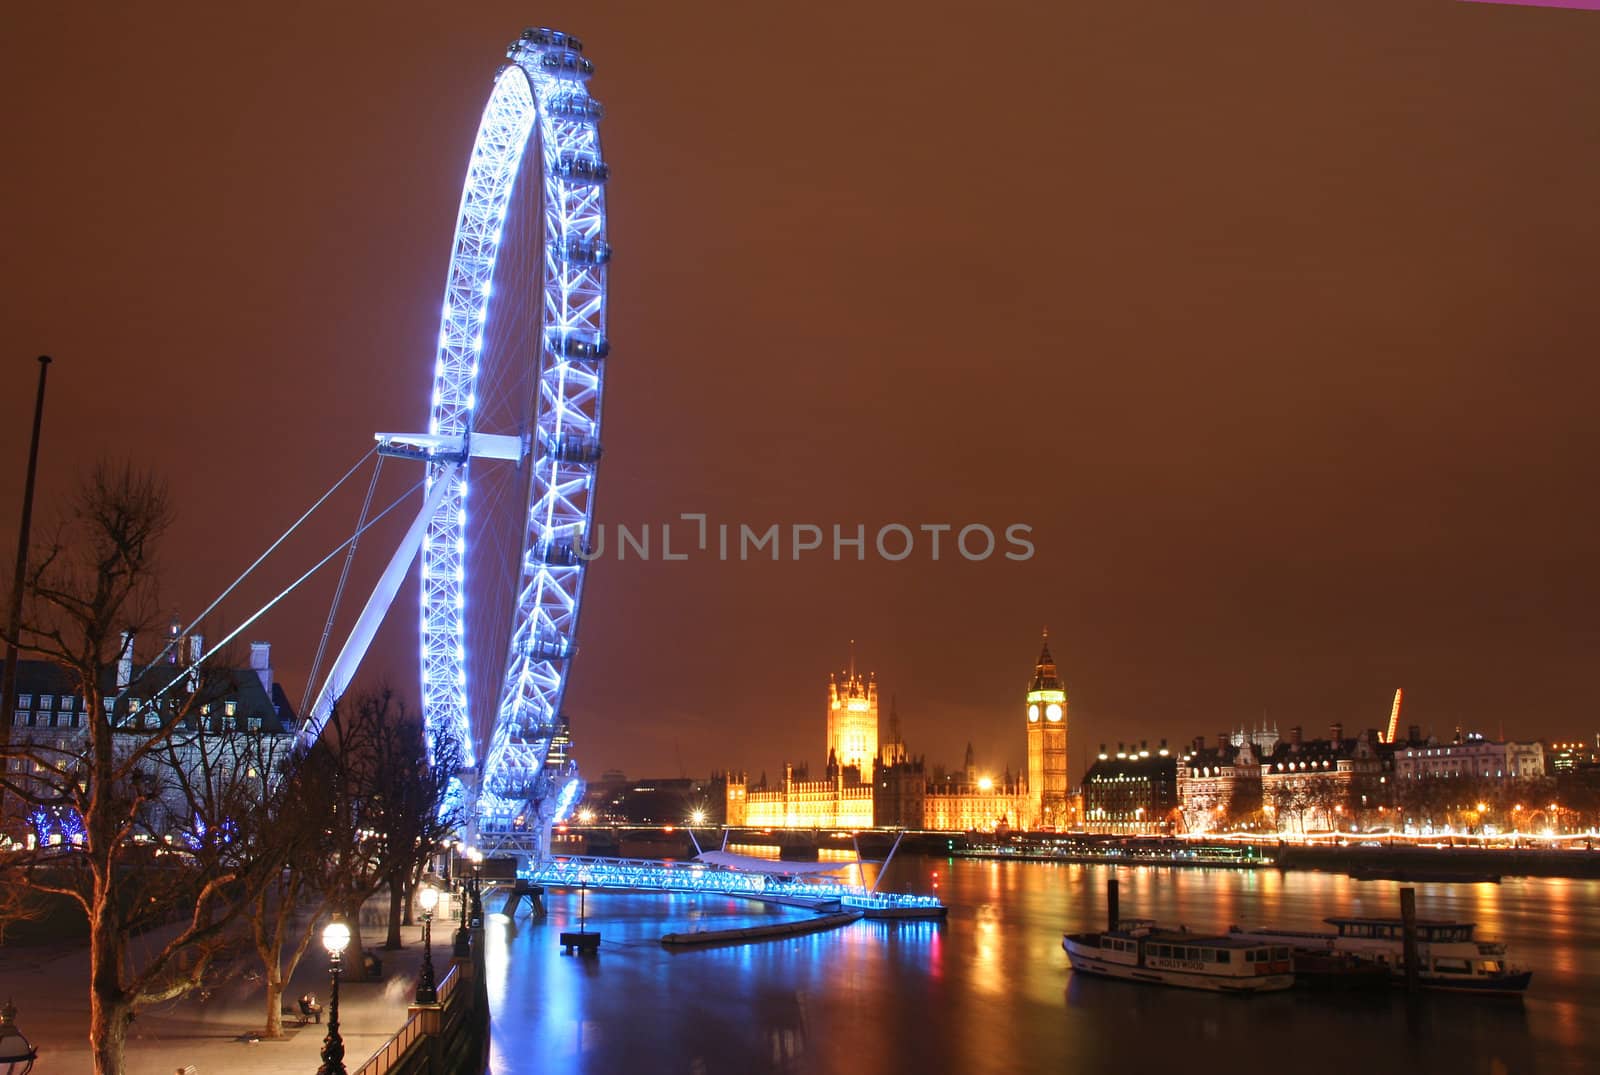 London, United Kingdom - December 27, 2007: The London Eye, the Thames and Westminster at night